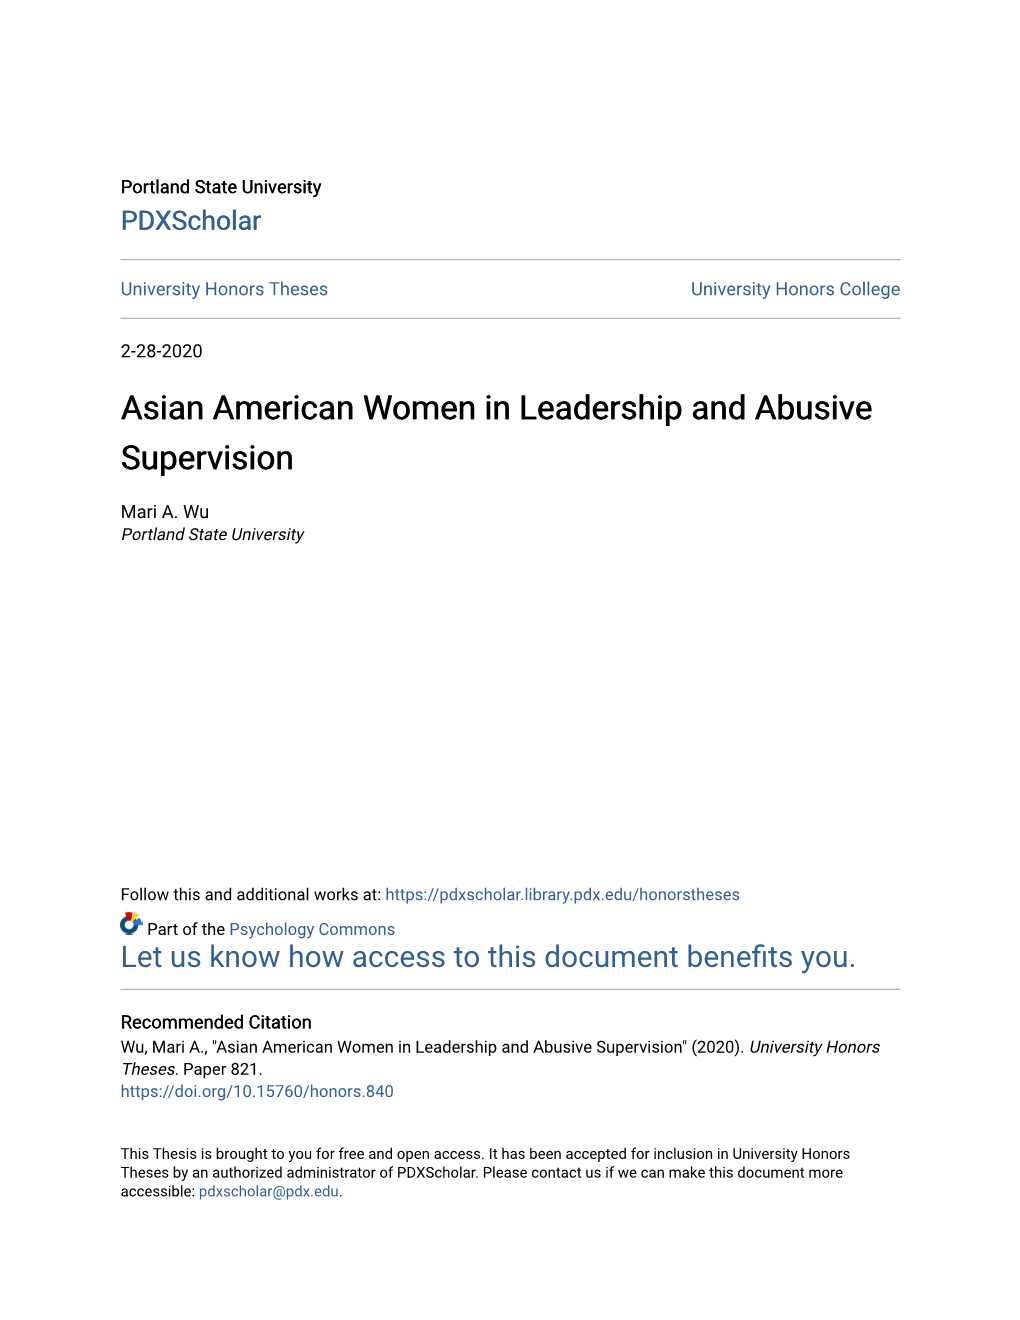 Asian American Women in Leadership and Abusive Supervision